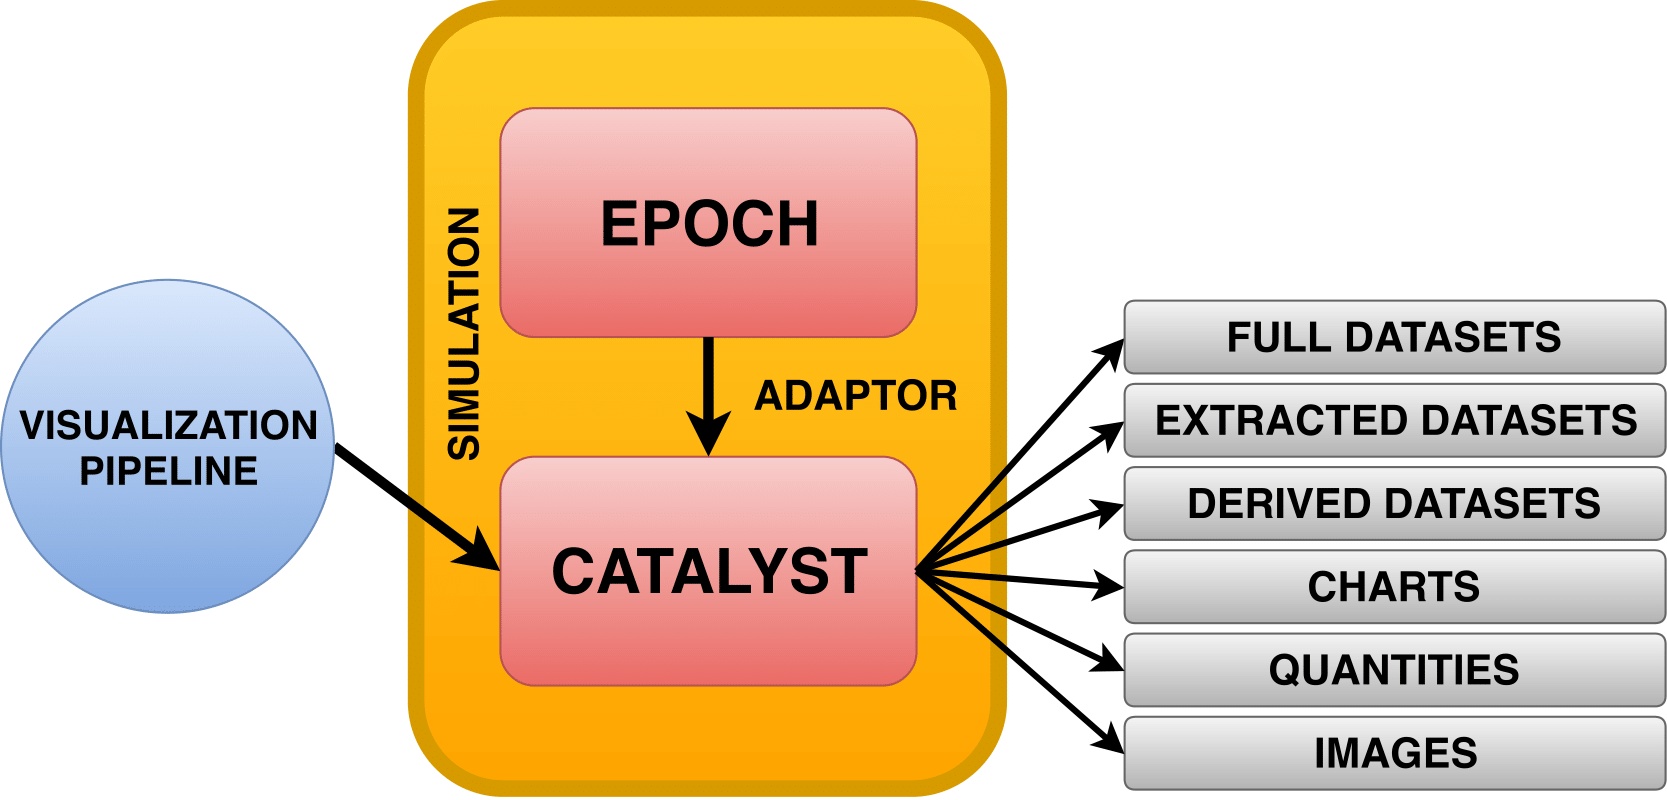 EPOCH workflow for in situ visualization using ParaView Catalyst